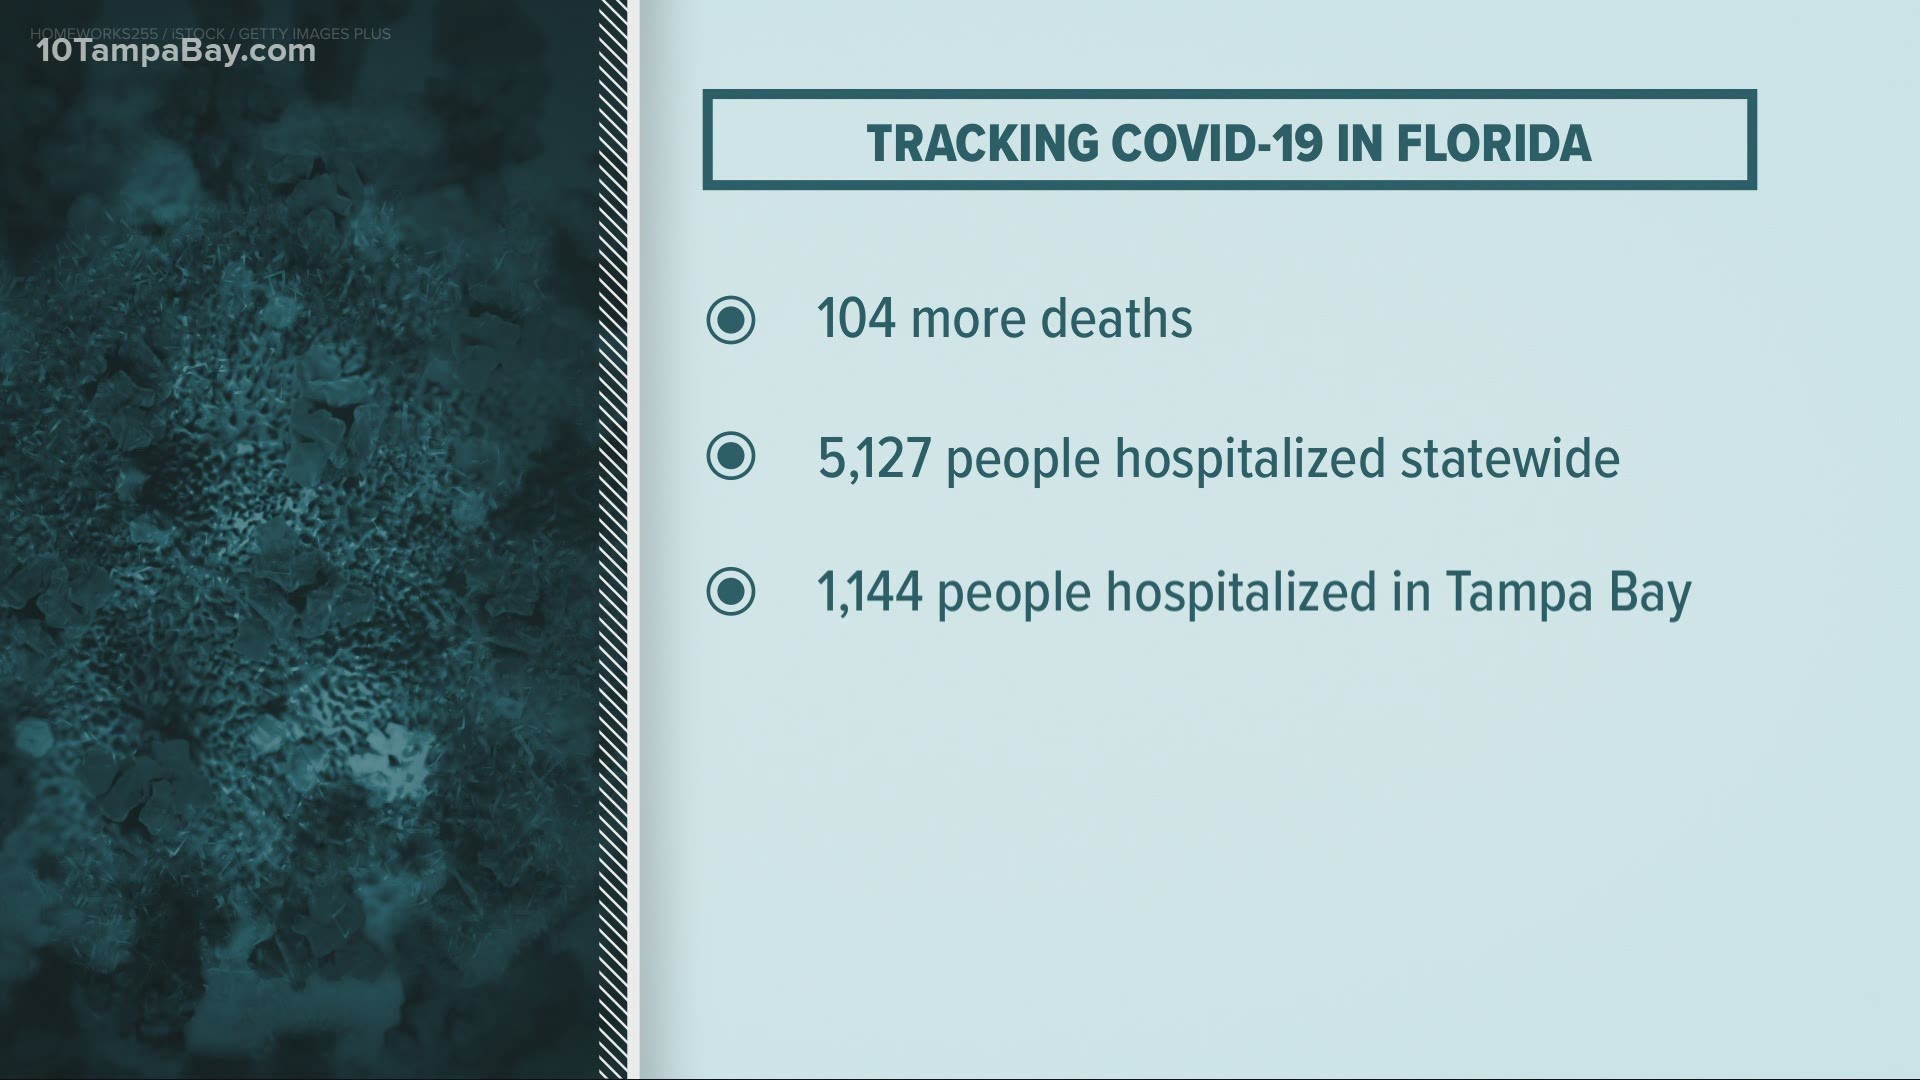 The state also reported another 104 people in Florida had died after testing positive for coronavirus.